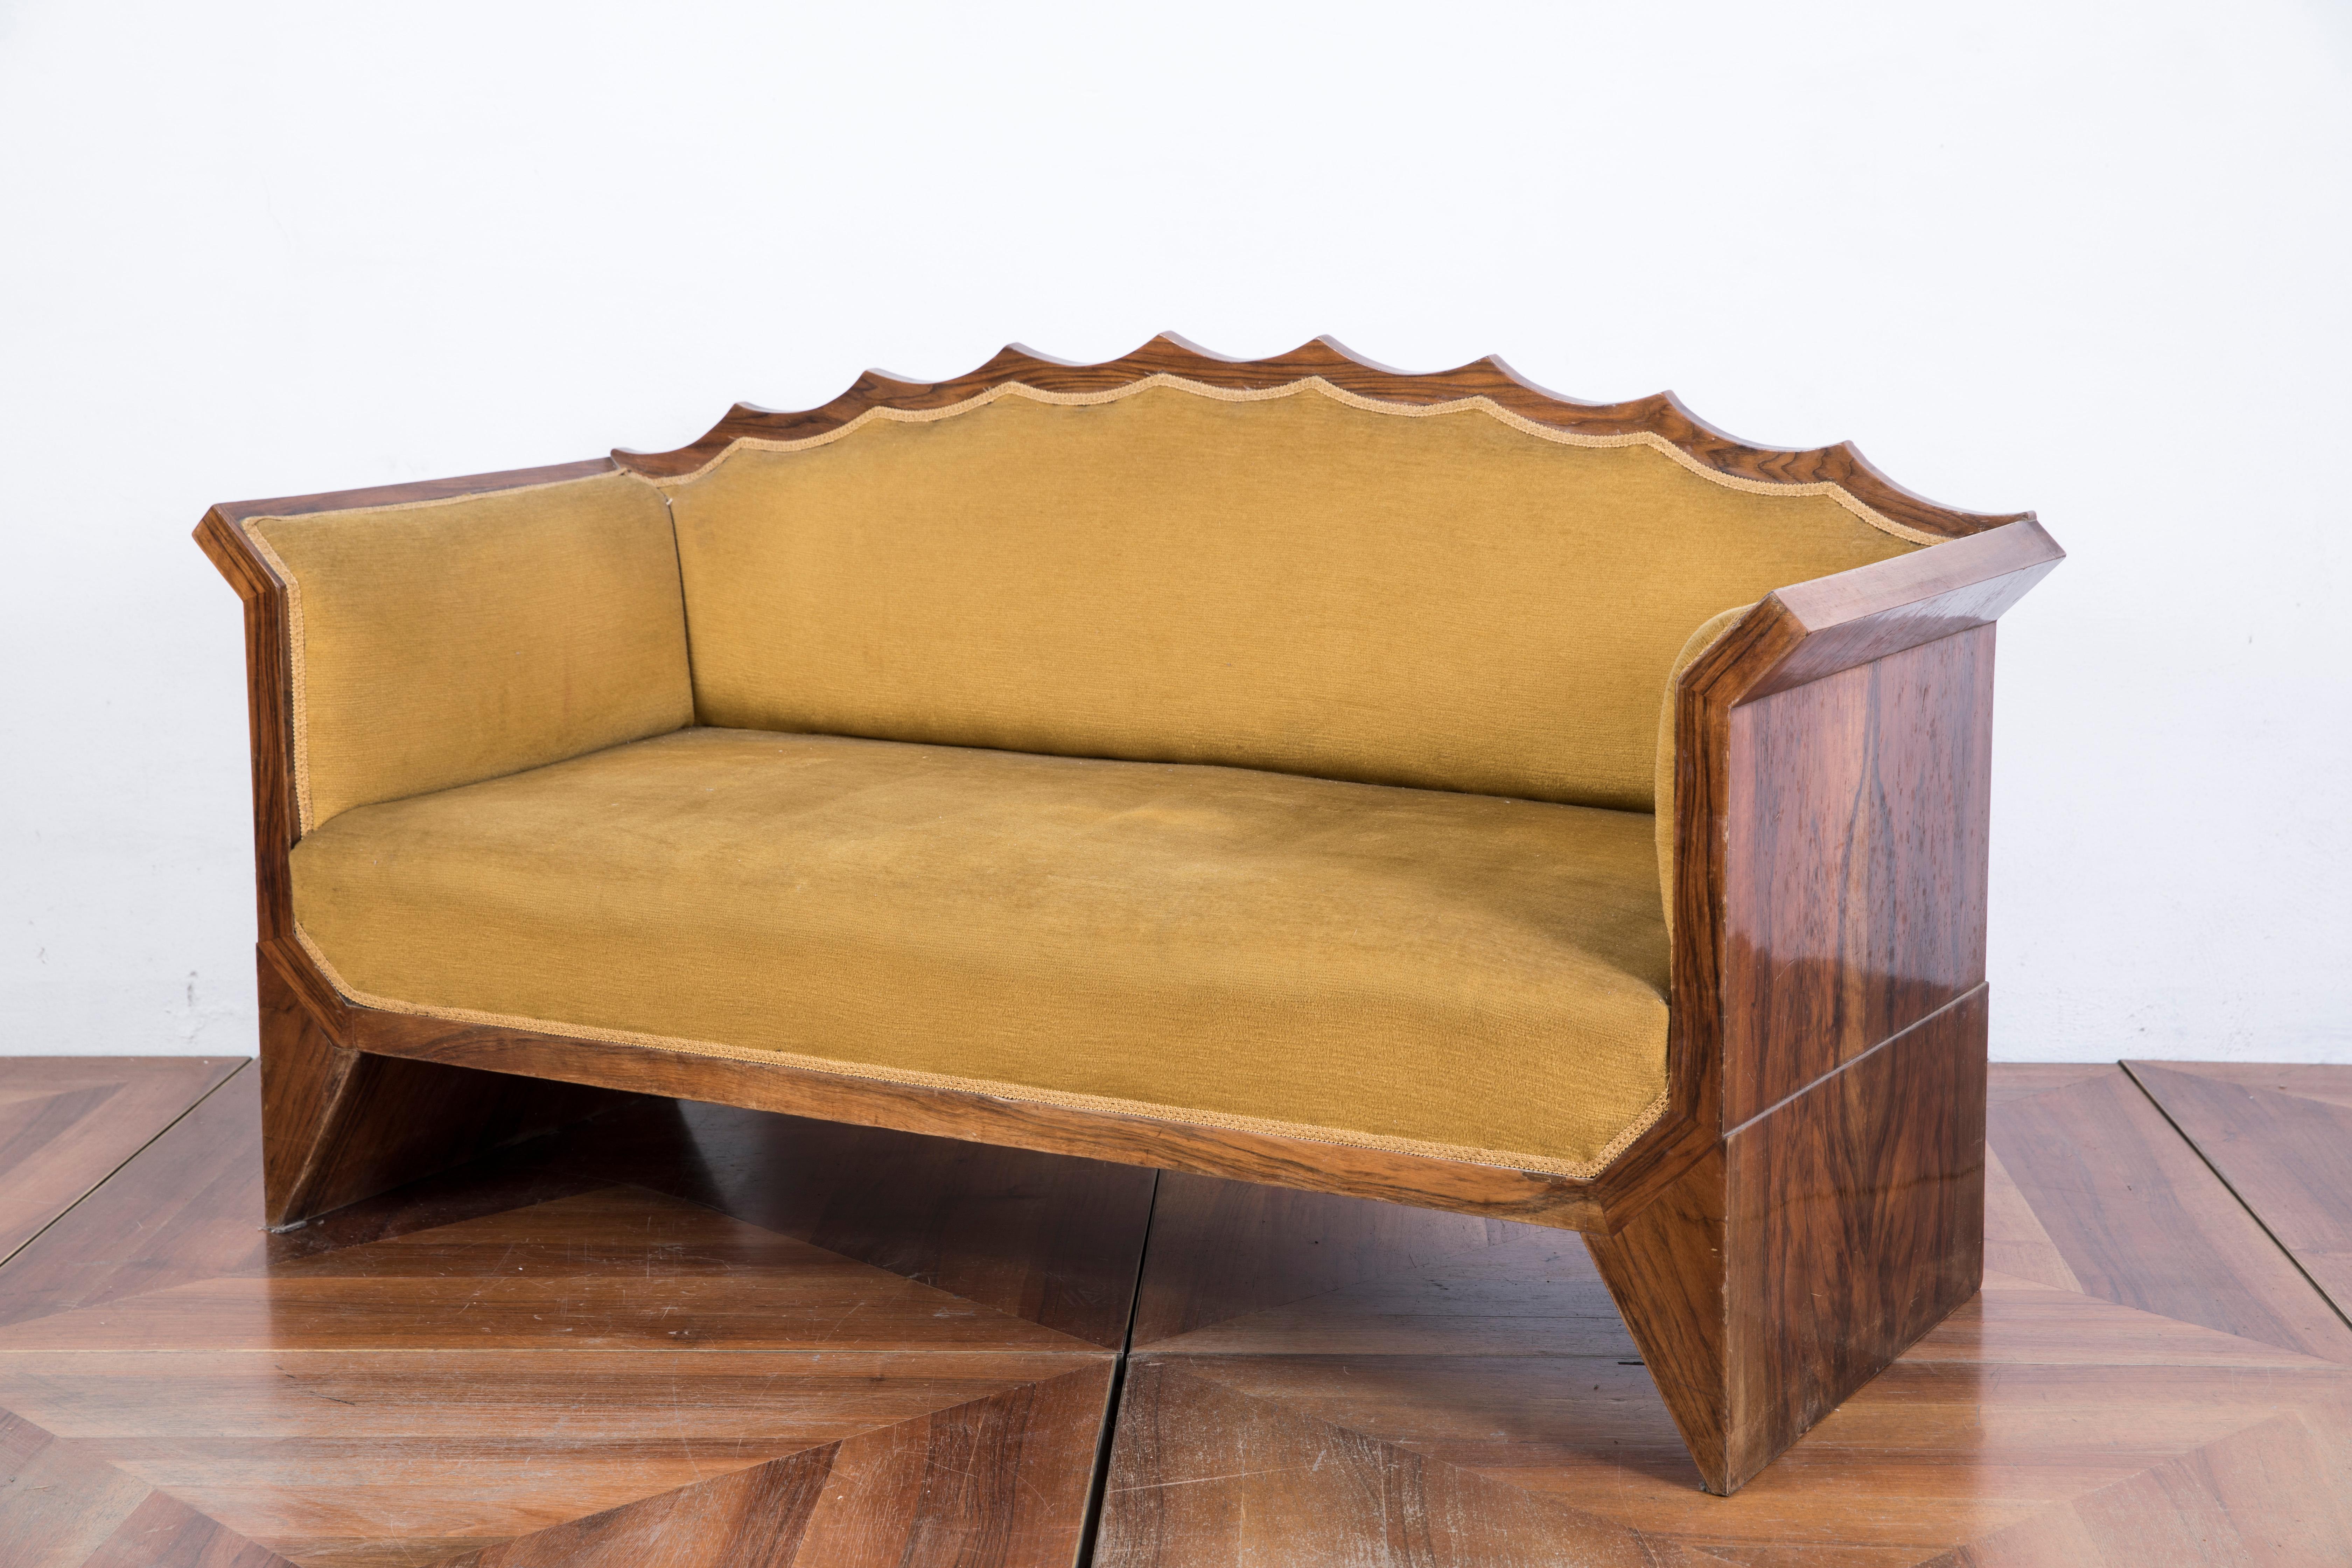 A fine period example of Austrian Art Deco design, with incurved padded back and seat, surrounded by a scalloped frame with a wavy wood crest and triangle shaped legs. The sofa is in solid wood black walnut veneered.